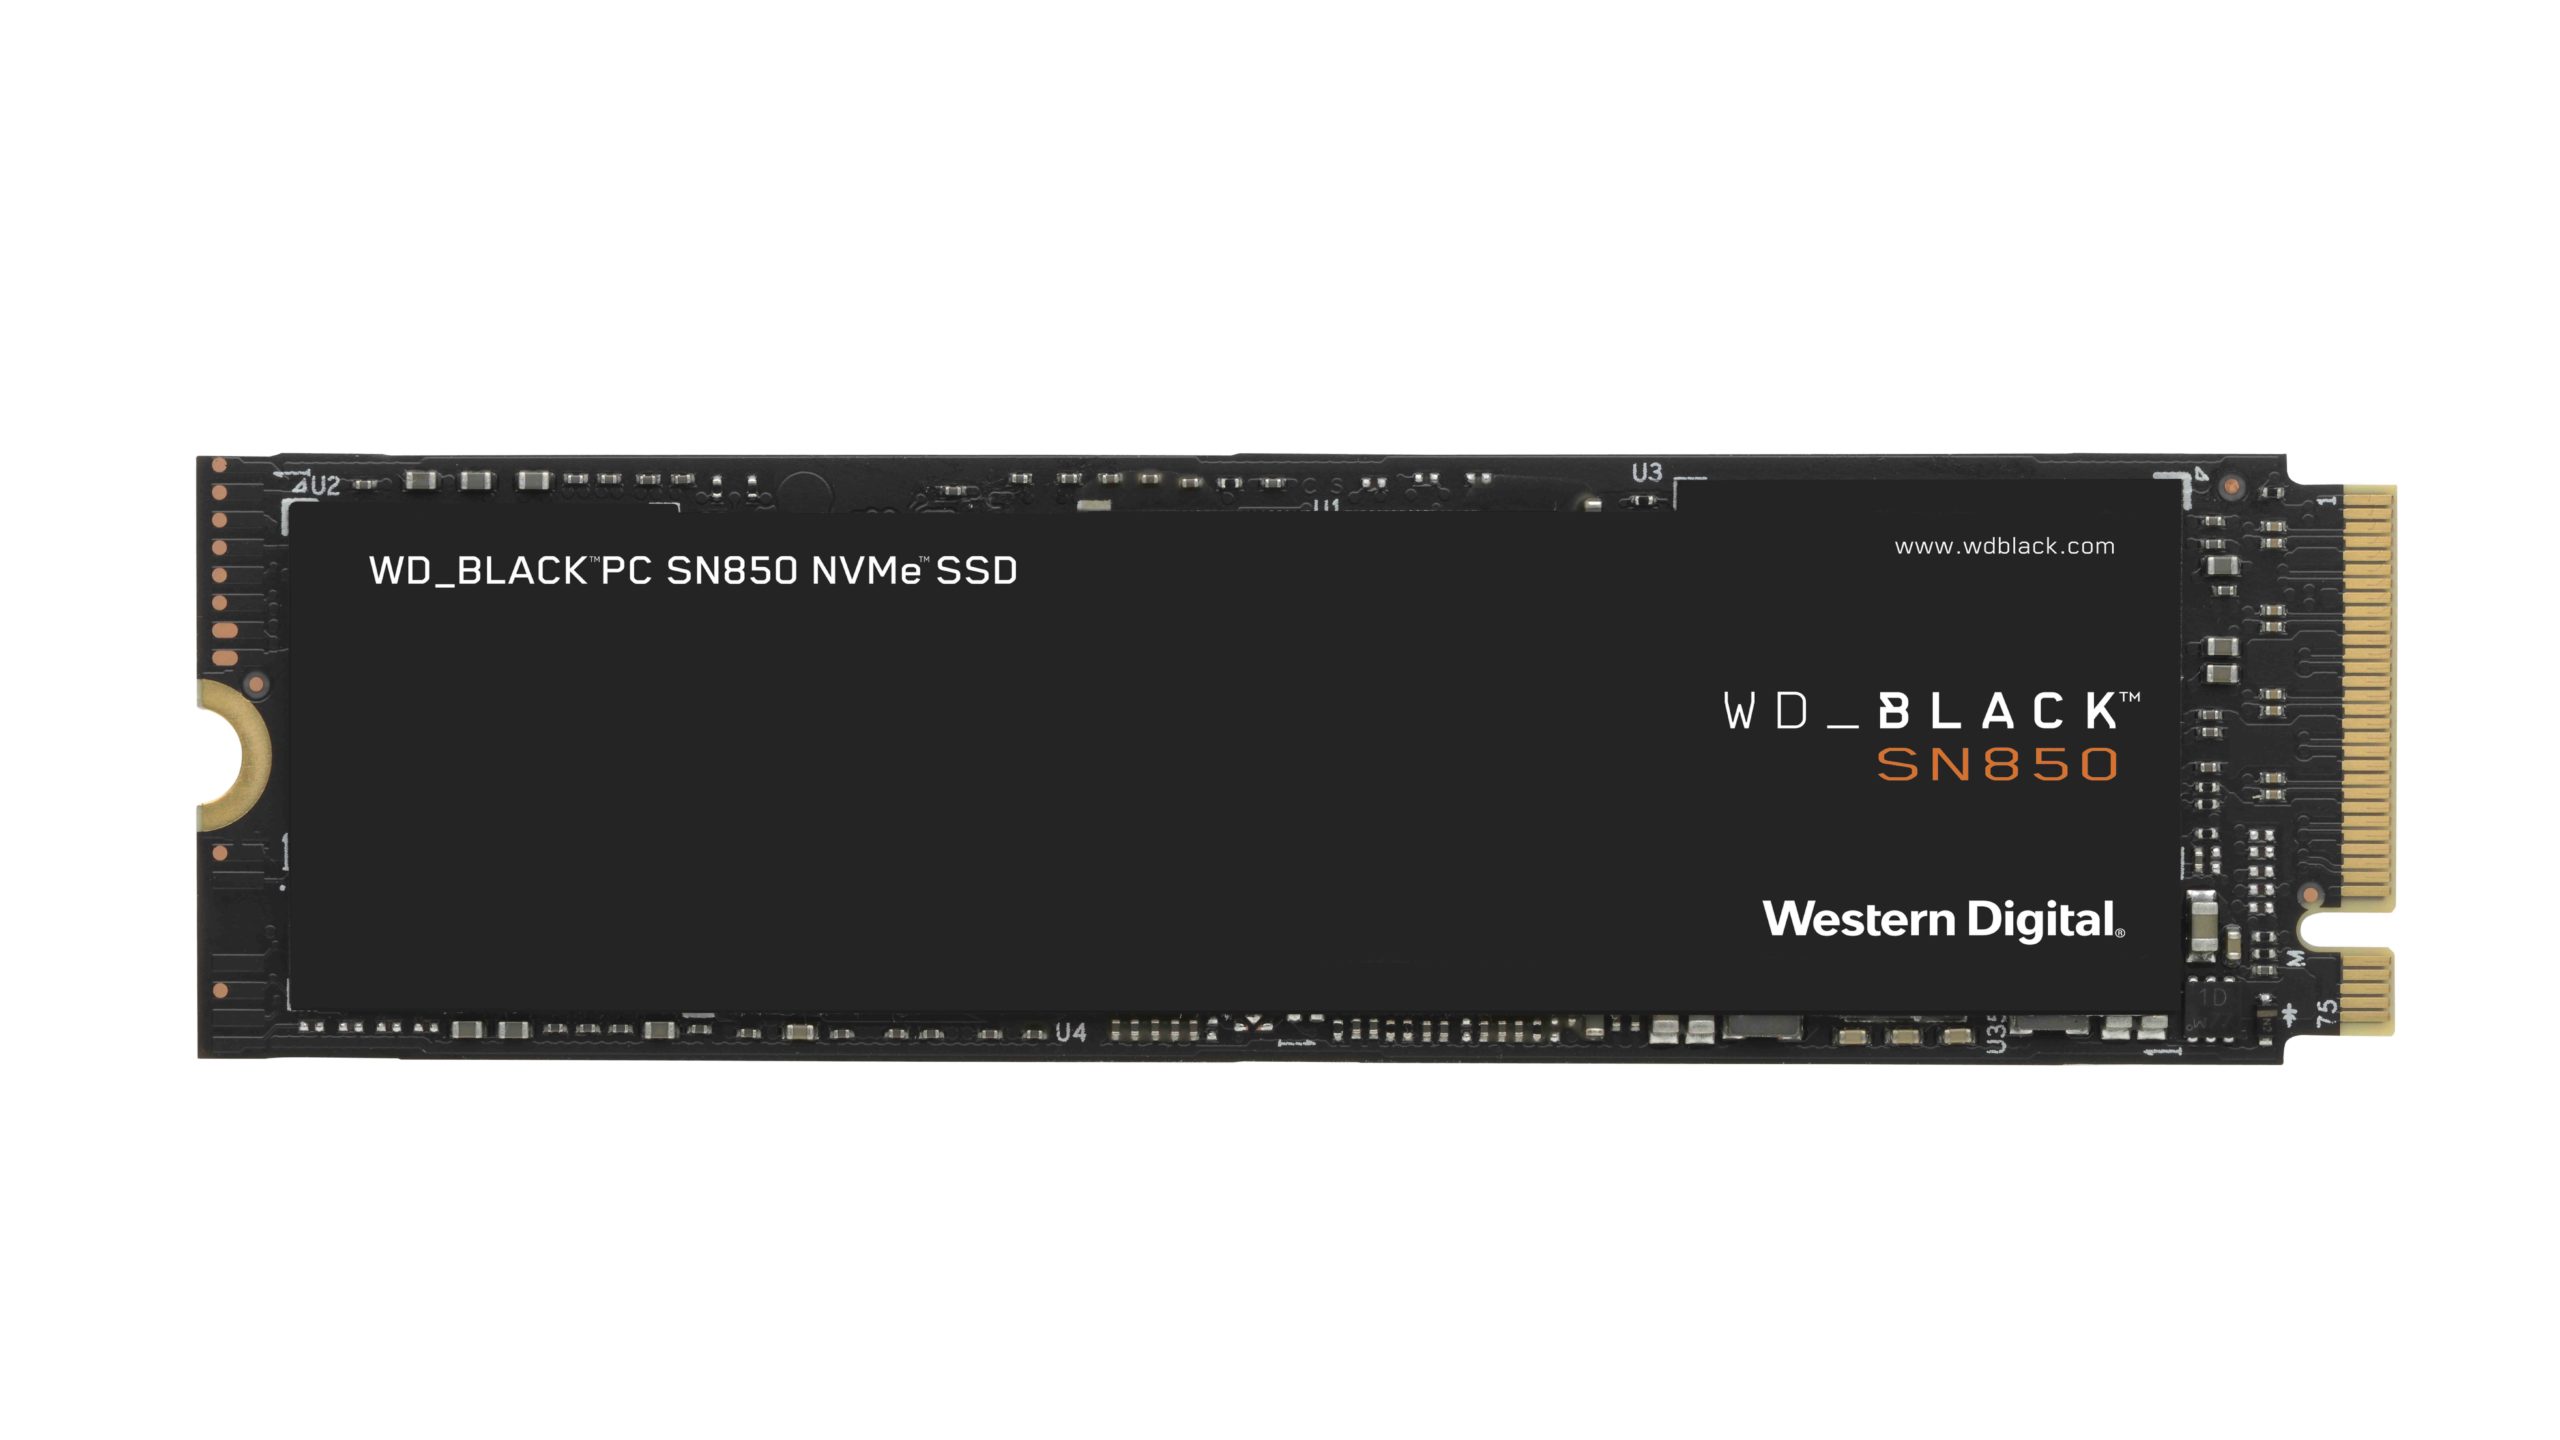 WD_BLACK™ AN1500 NVMe™ PCIe SSD Add-in-Card